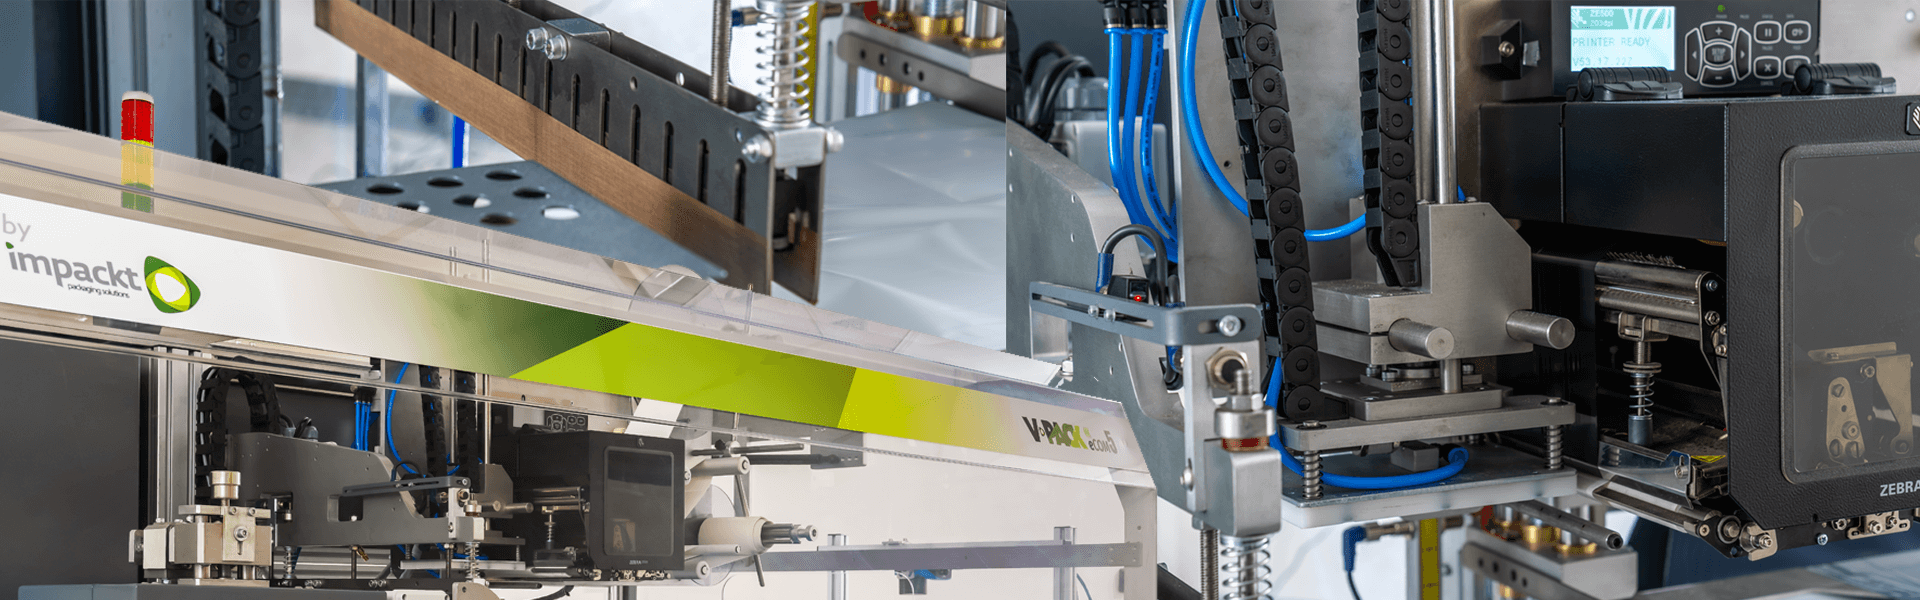 Automated Packaging Machines